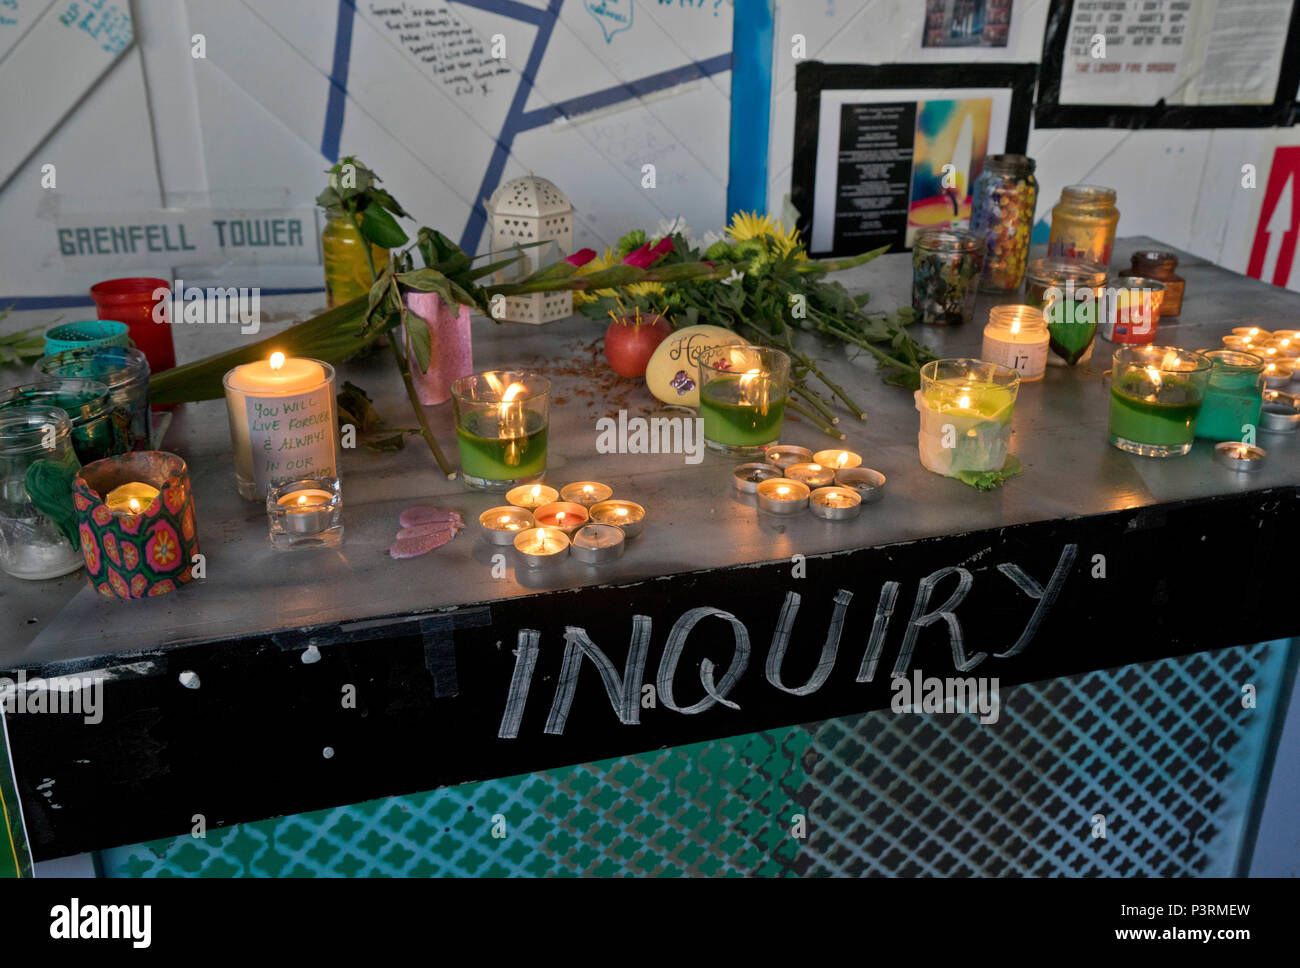 Vigil to commemorate the first anniversary of the Grenfell Tower fire disaster in London,UK Stock Photo